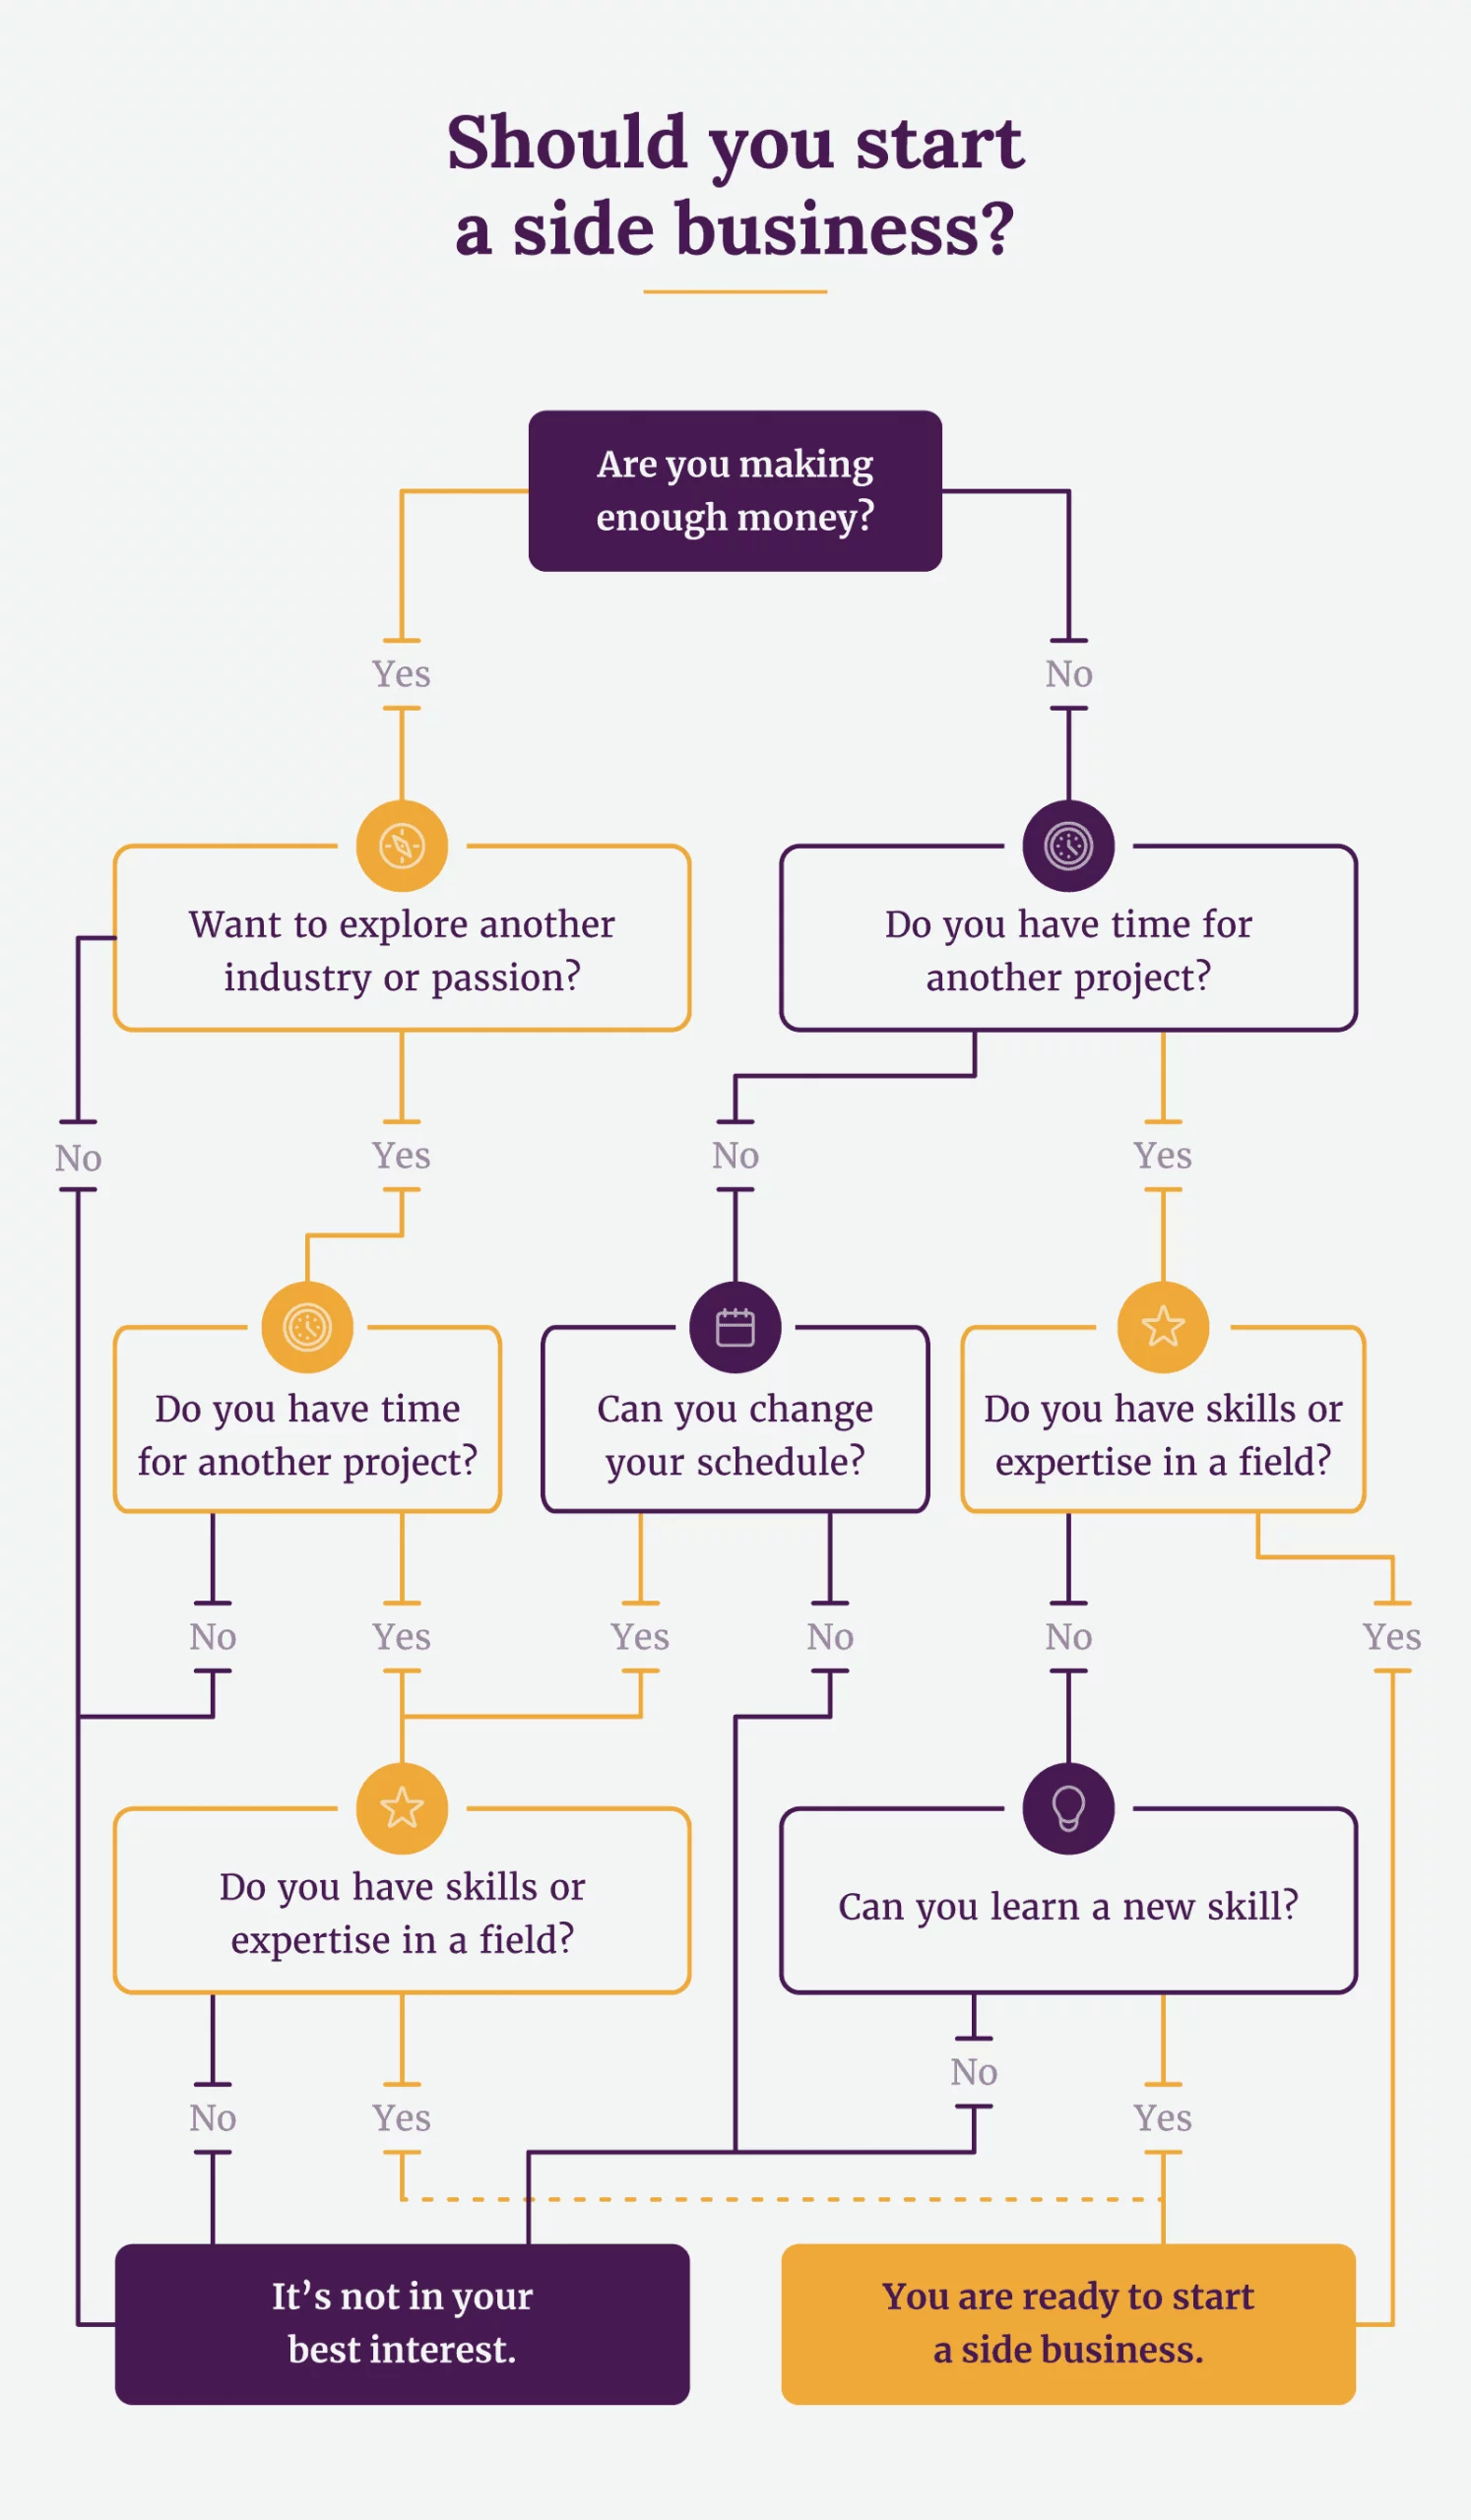 Should You Start a Side Business